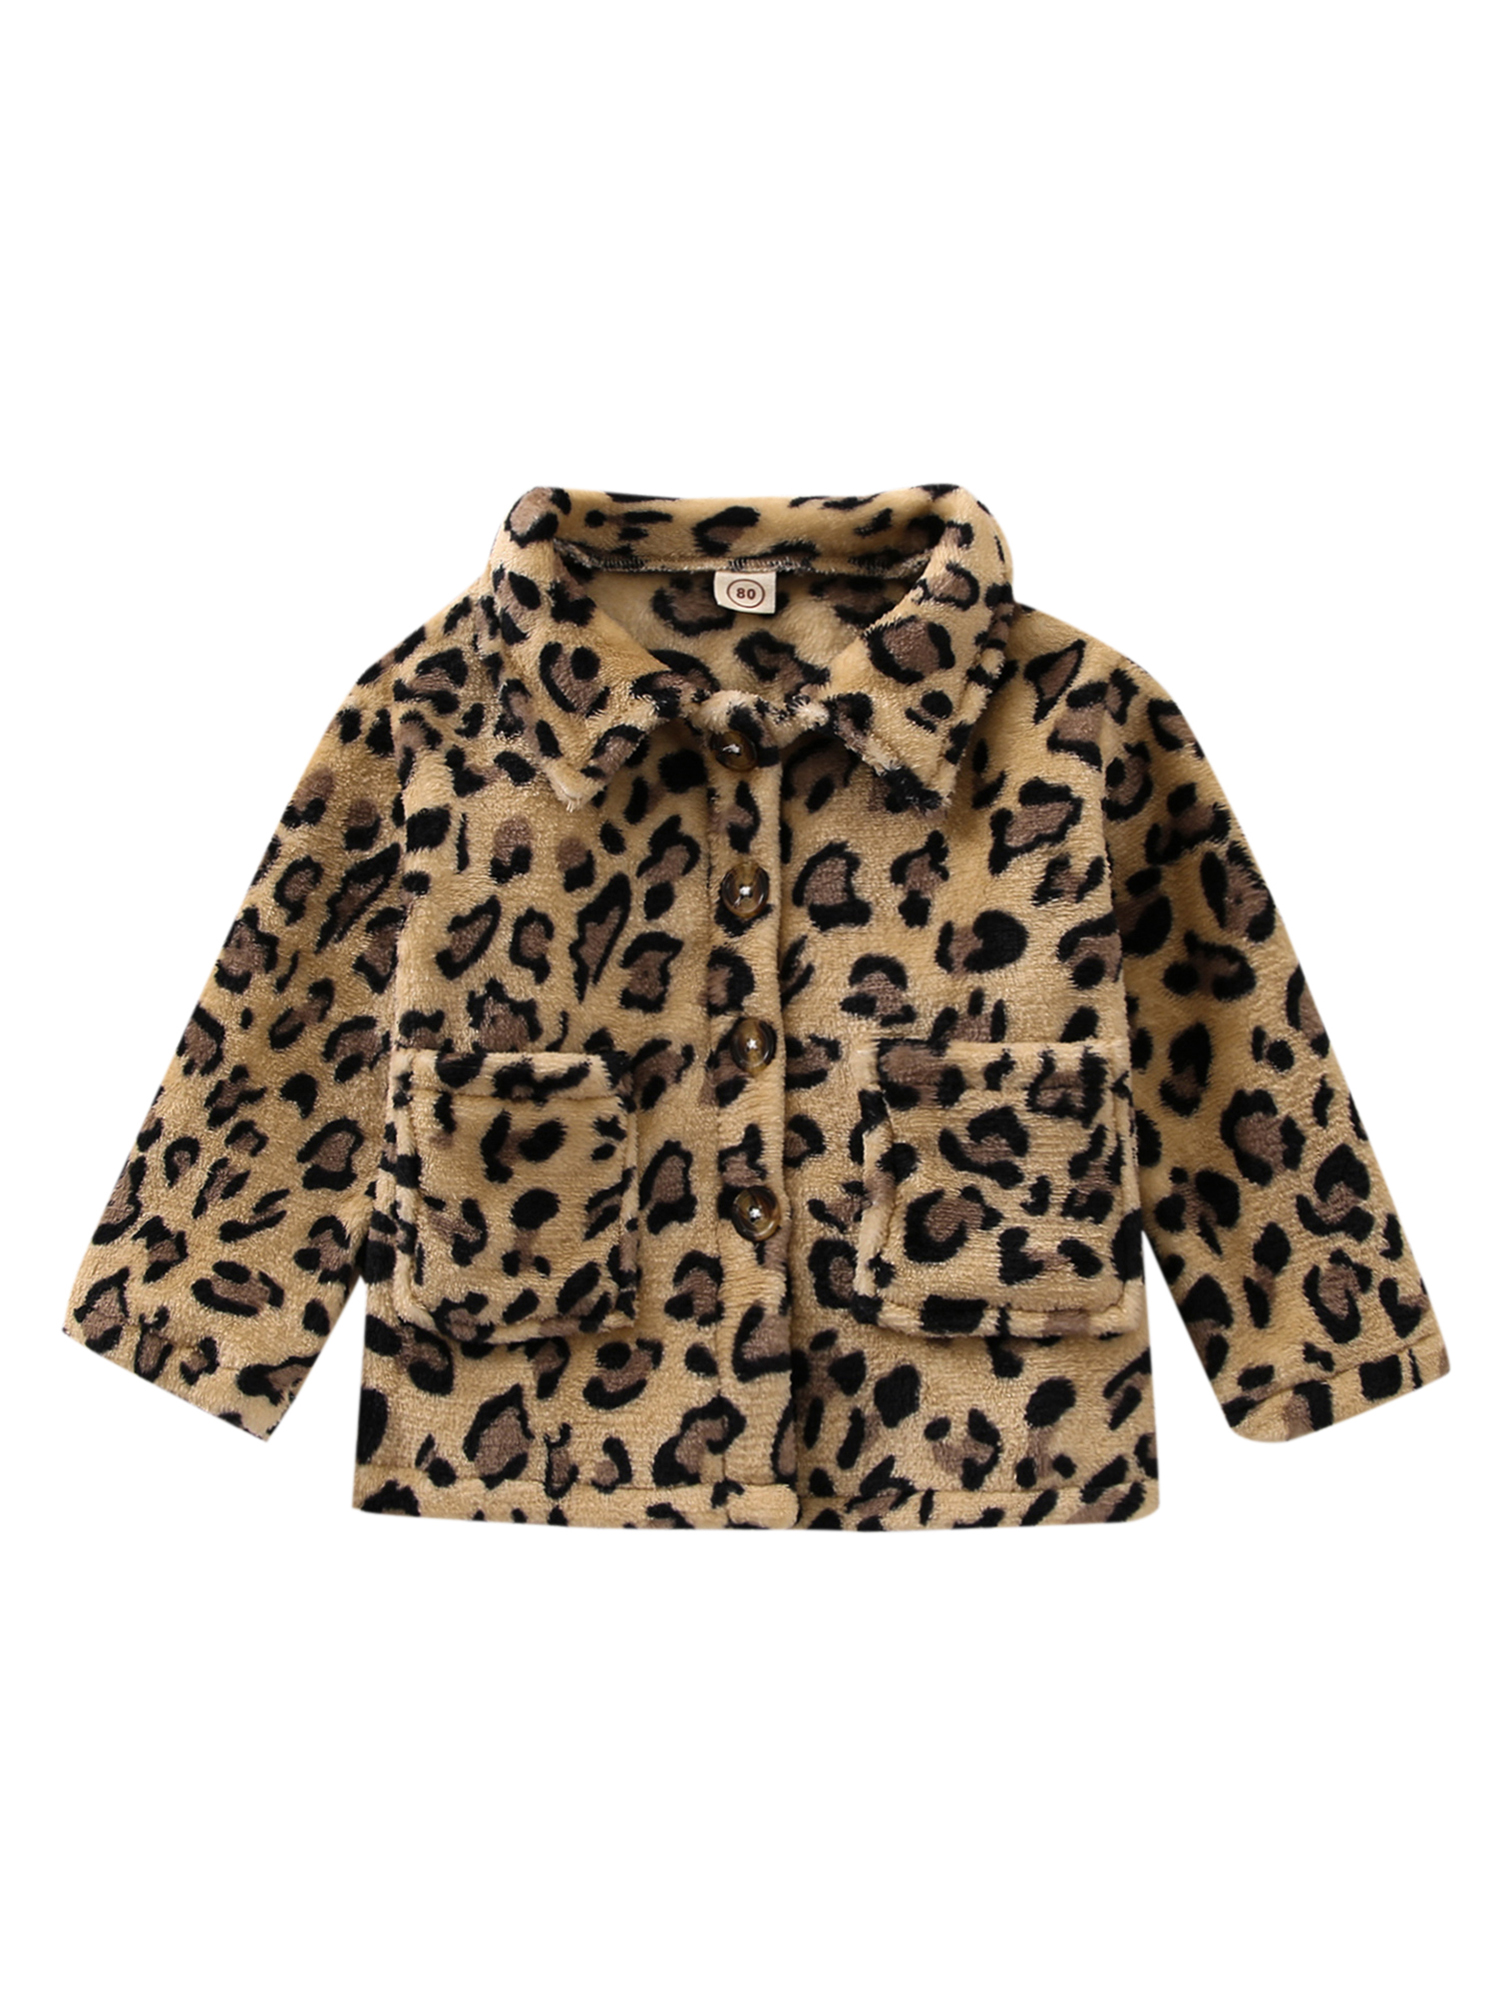 Musuos Toddler Baby Winter Jacket, Fashion Long Sleeve Leopard Print Button Down Plush Coat - image 2 of 10